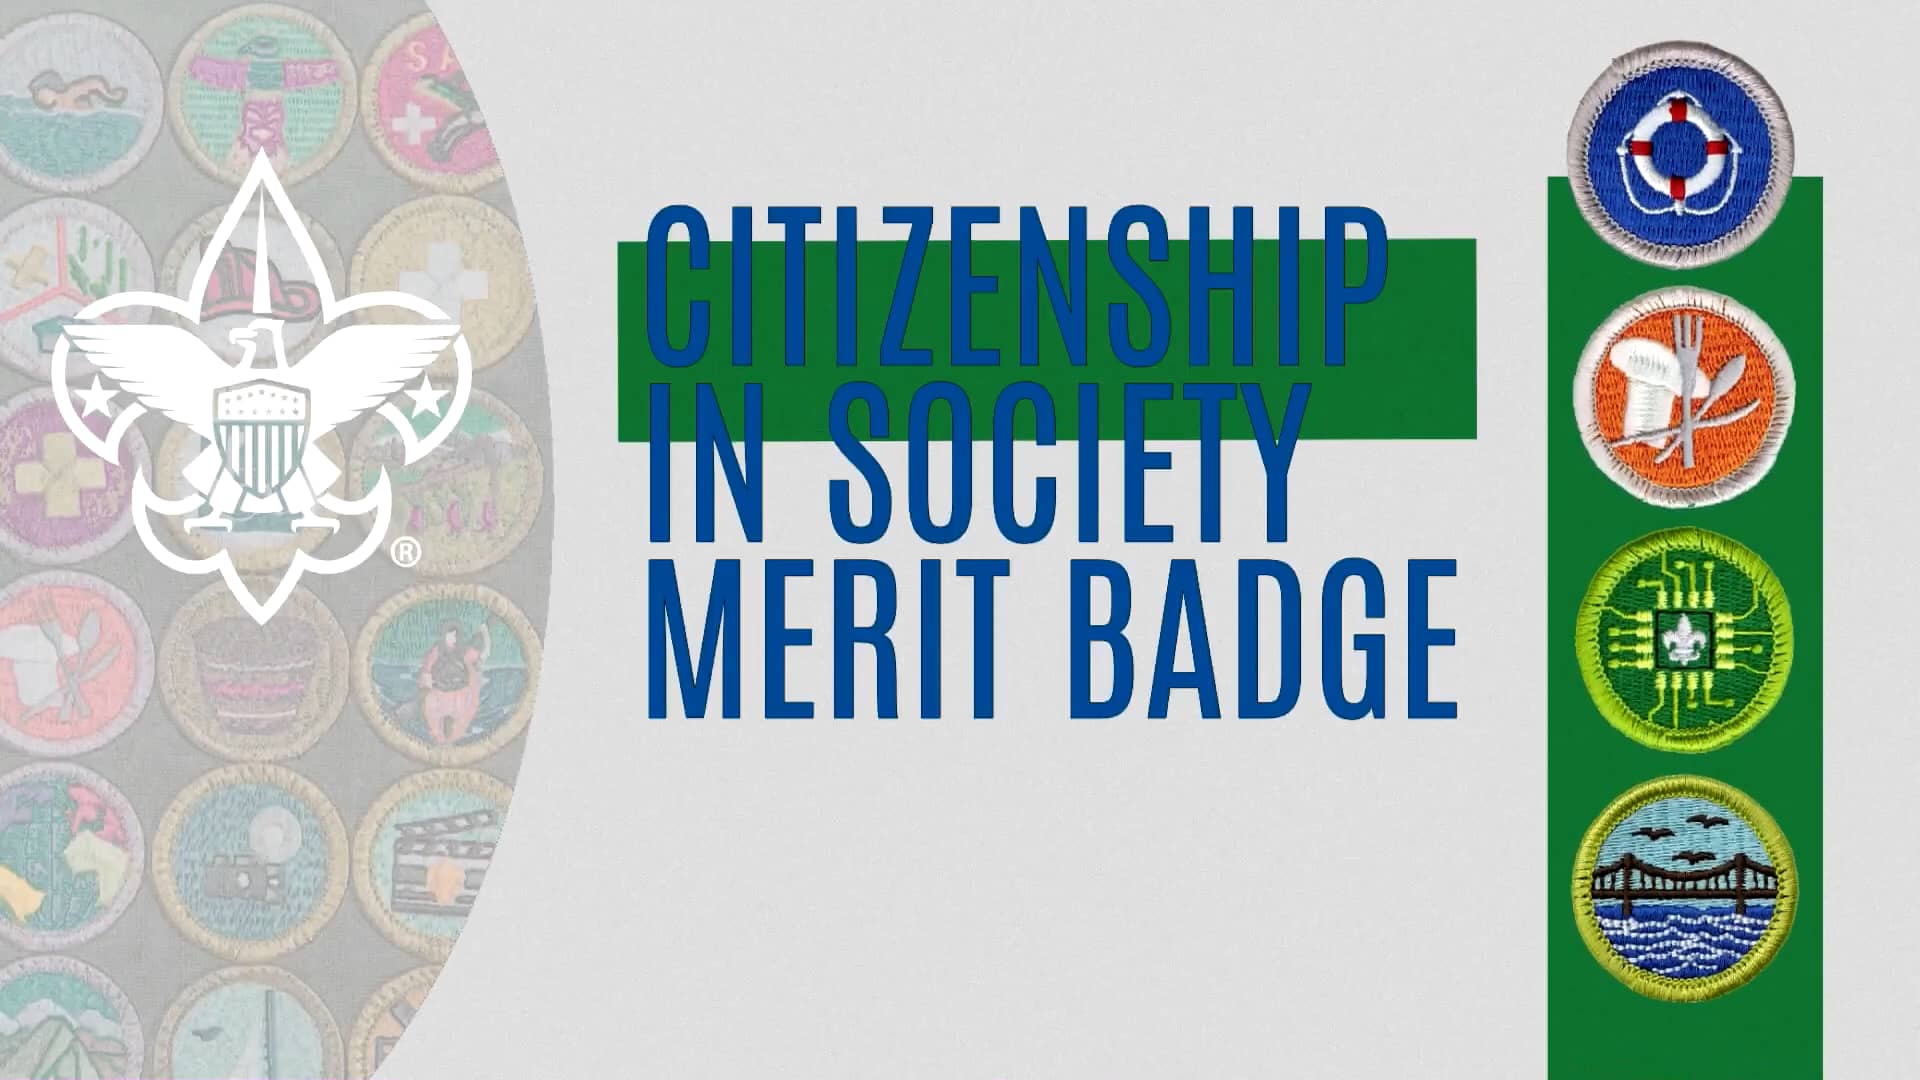 Citizenship in Society Merit Badge for General Audiences on Vimeo